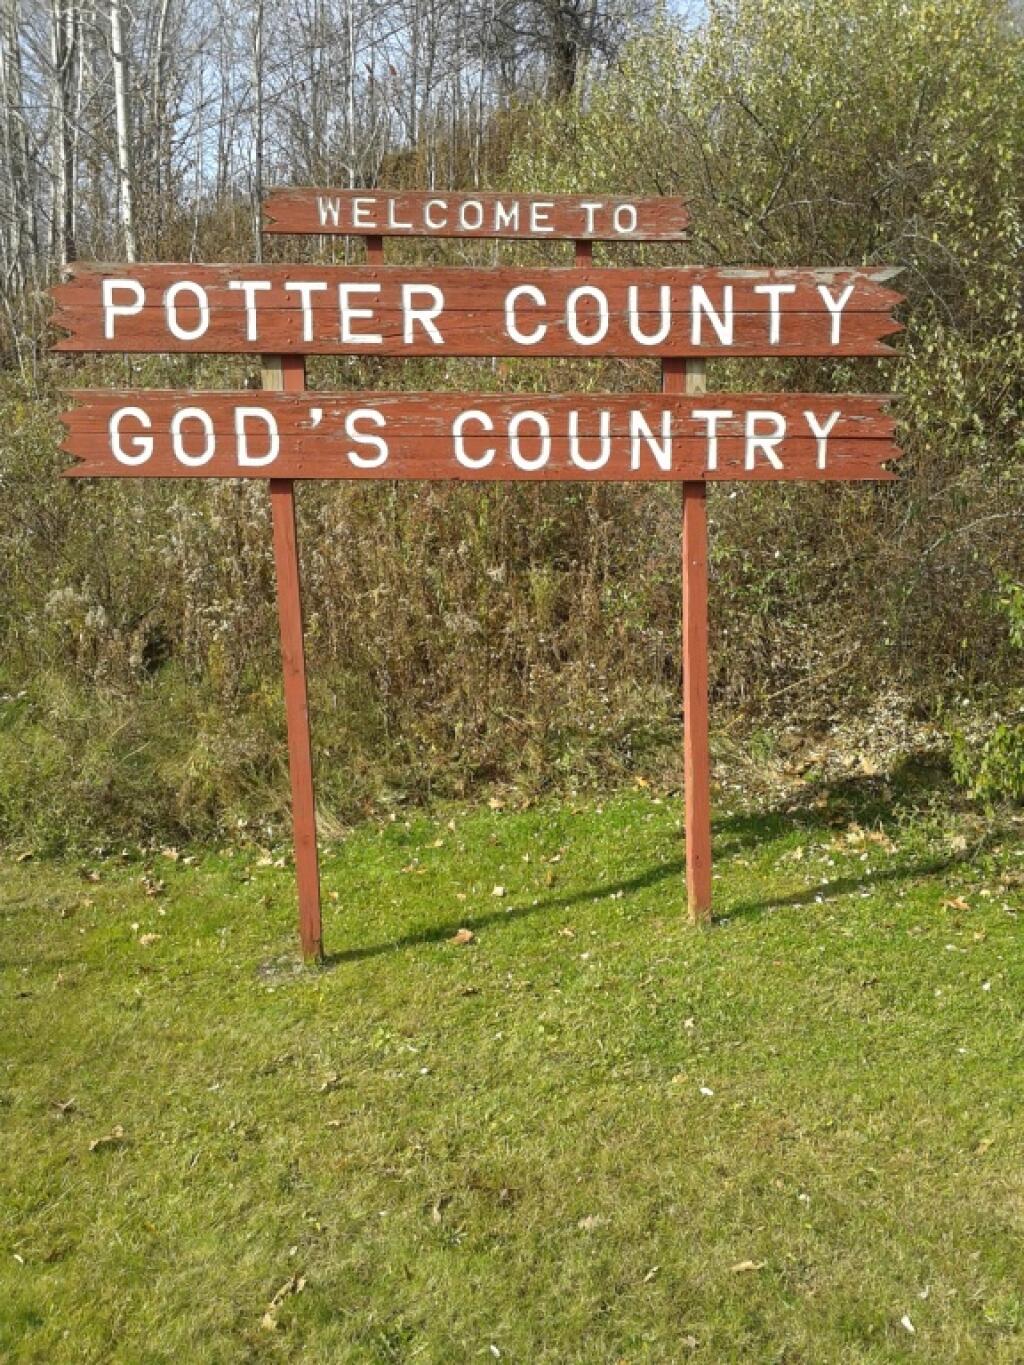 Welcome to Potter County